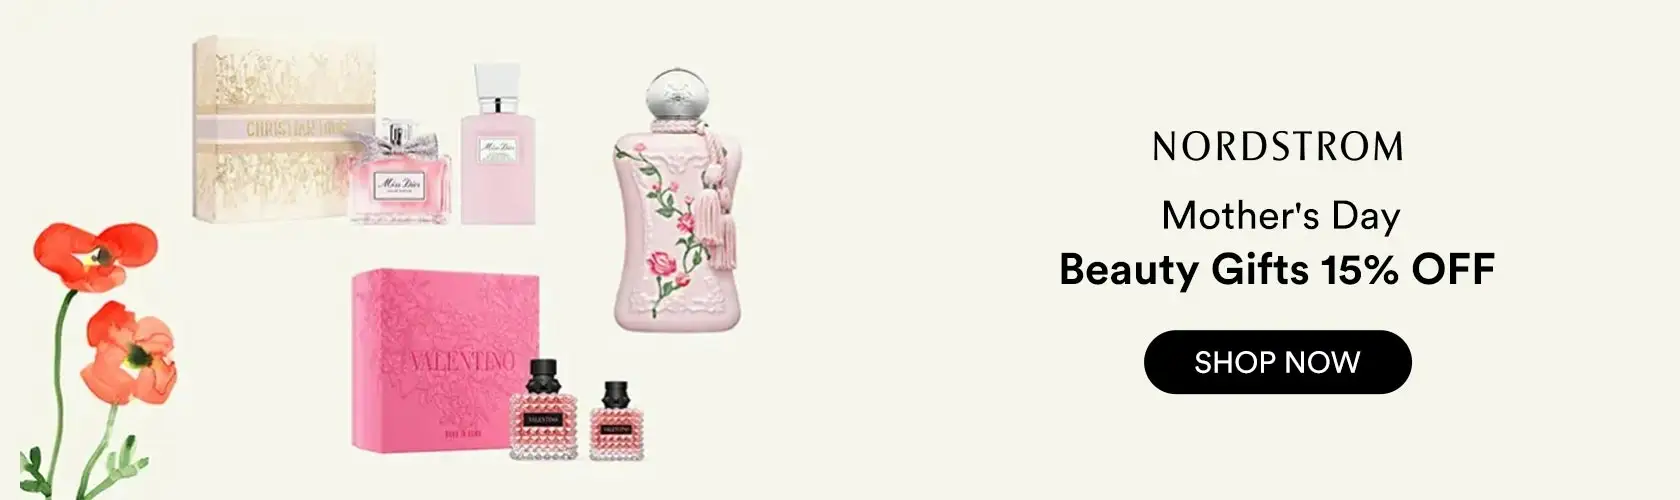 Nordstrom: Mother's Day Beauty Gifts 15% OFF